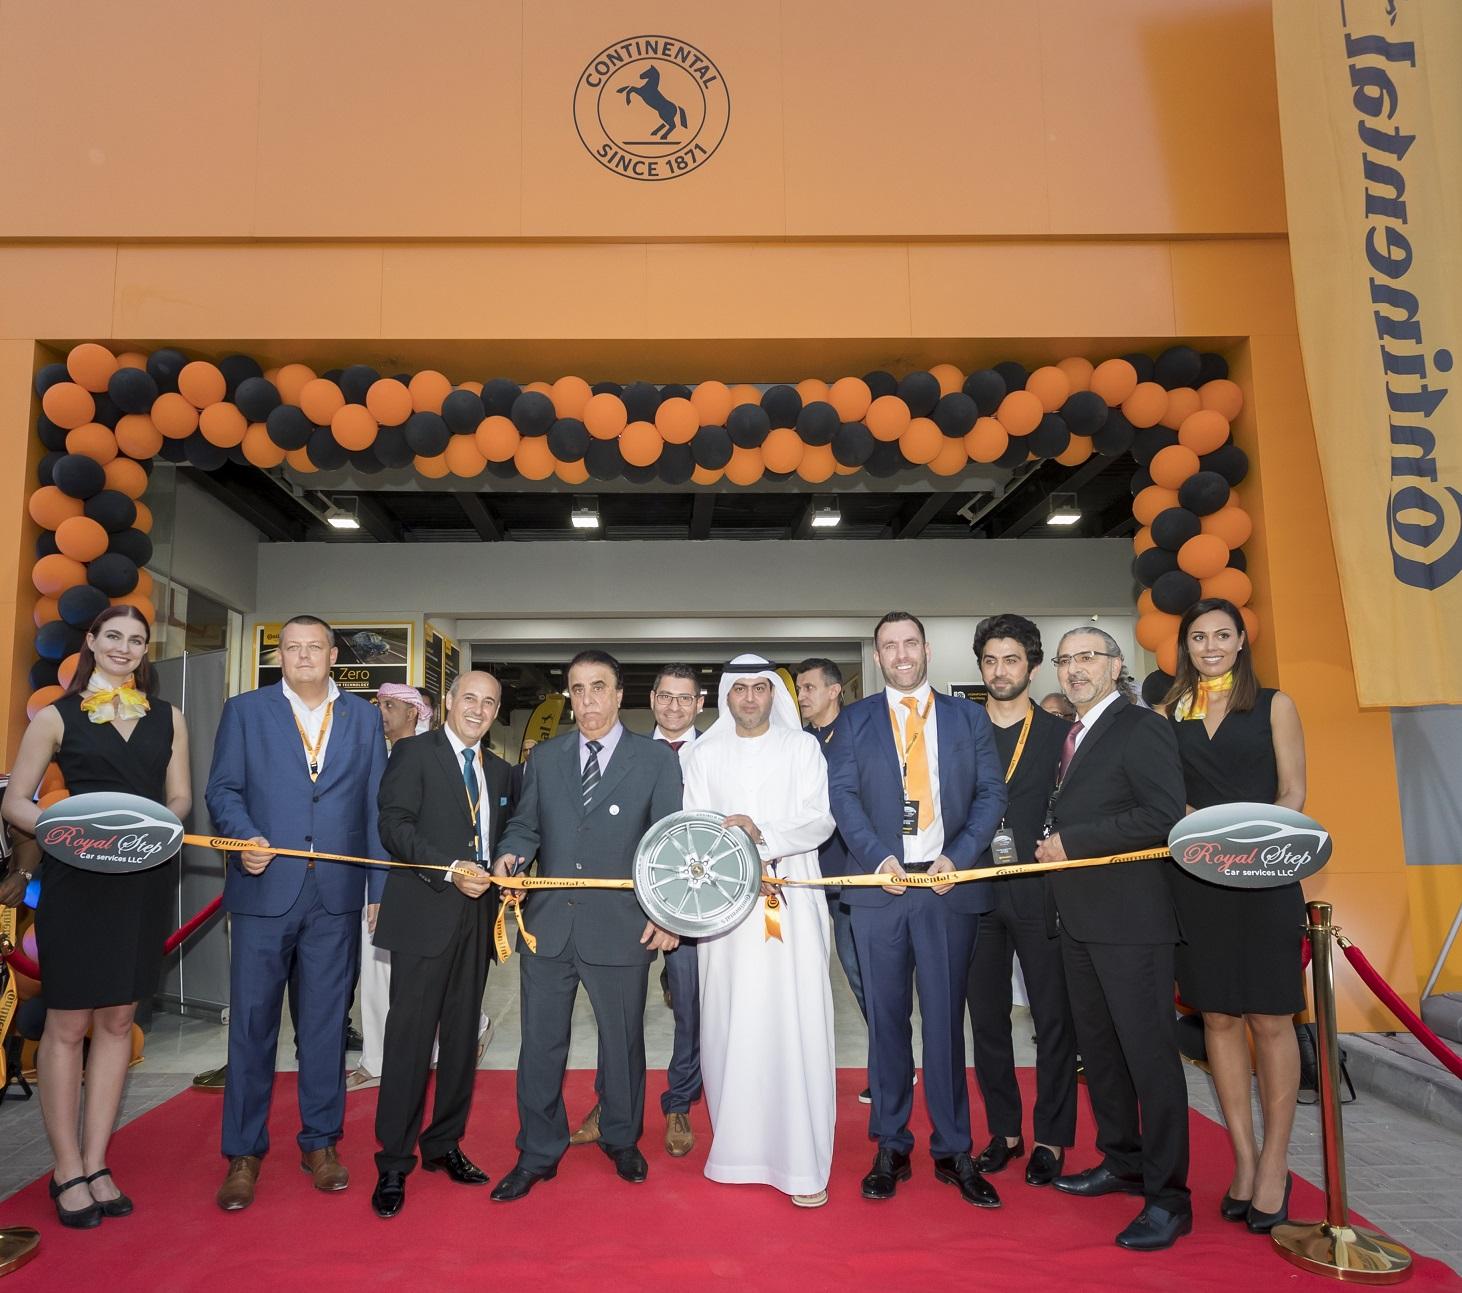 Royal Step becomes ‘Authorised Dealership’ of Continental and EUT, (L-R) , Karel Kucera, Managing Director of Continental Middle East, Hassan El Haj, Managing Director of Royal Step Car Services, Khalil Ismail Jaber, CEO at Royal Step Car Services, Khalid Abdulla Tariam, Chairman & General Manager of Dar Al Khaleej publishing house, and Shaun Smith, General Manager at EUT 